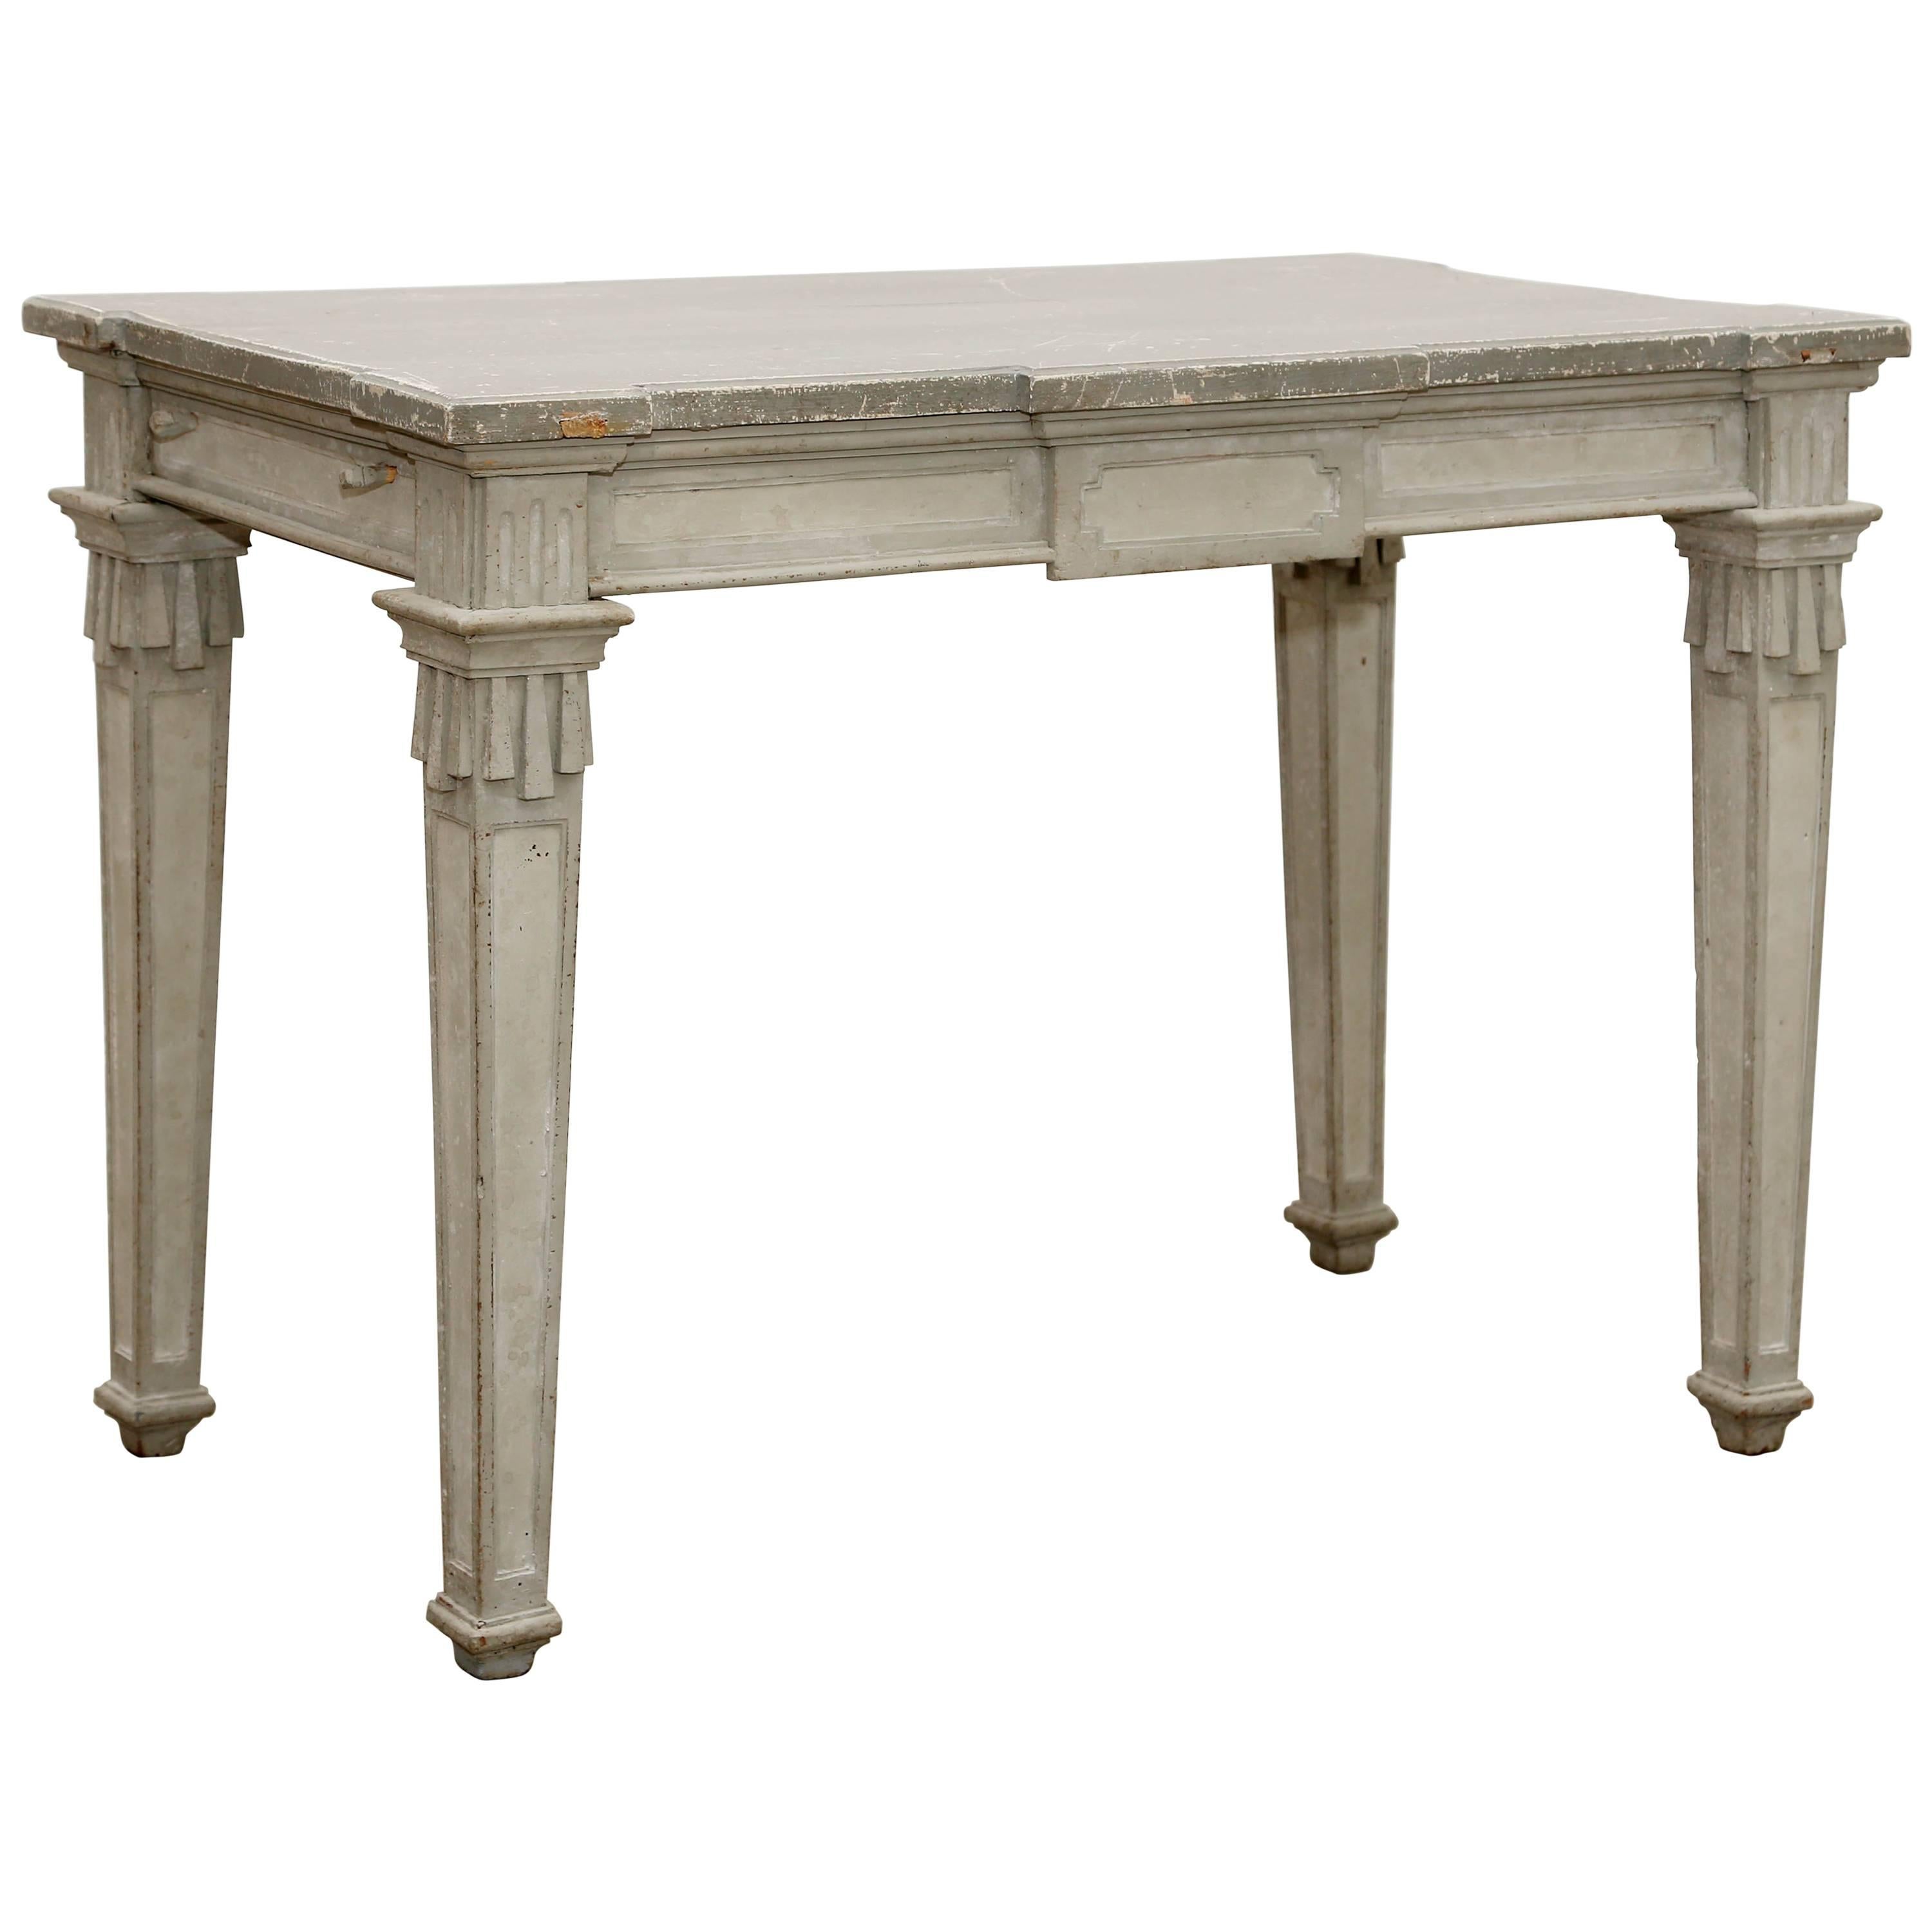 Antique Swedish Period Gustavian Painted Console Table Early 19th Century